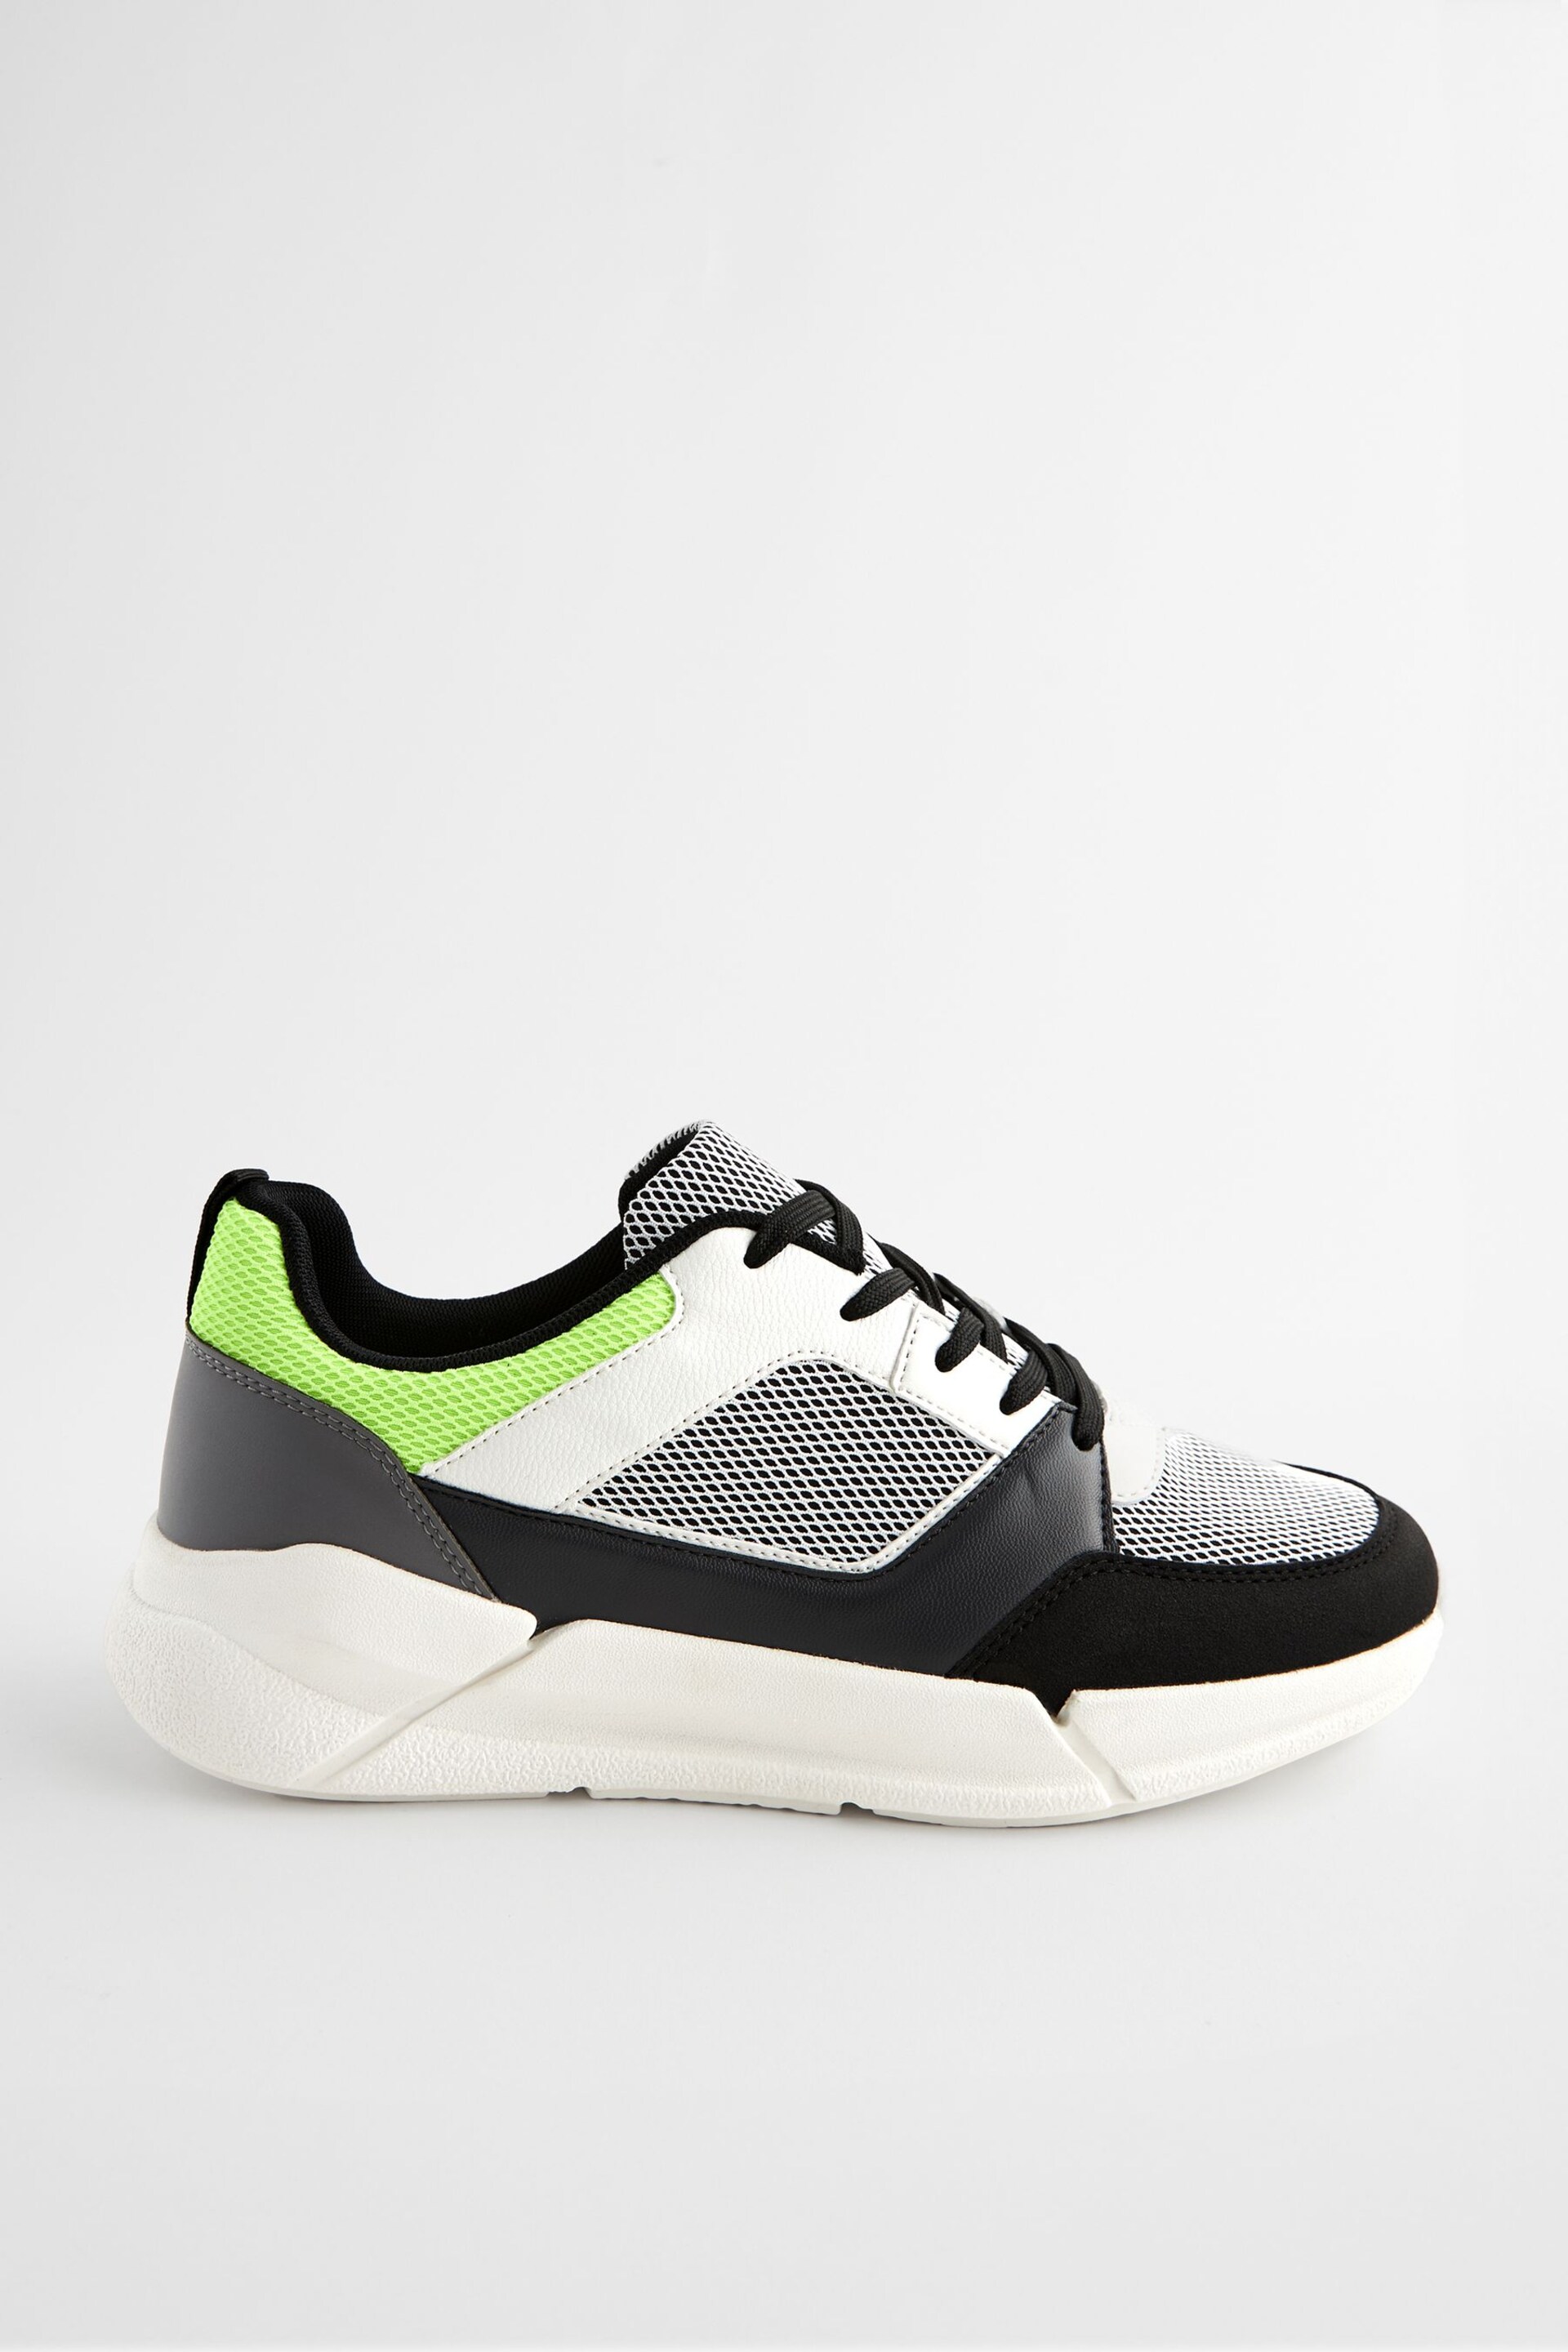 Black/White EDIT Mesh Trainers - Image 2 of 5